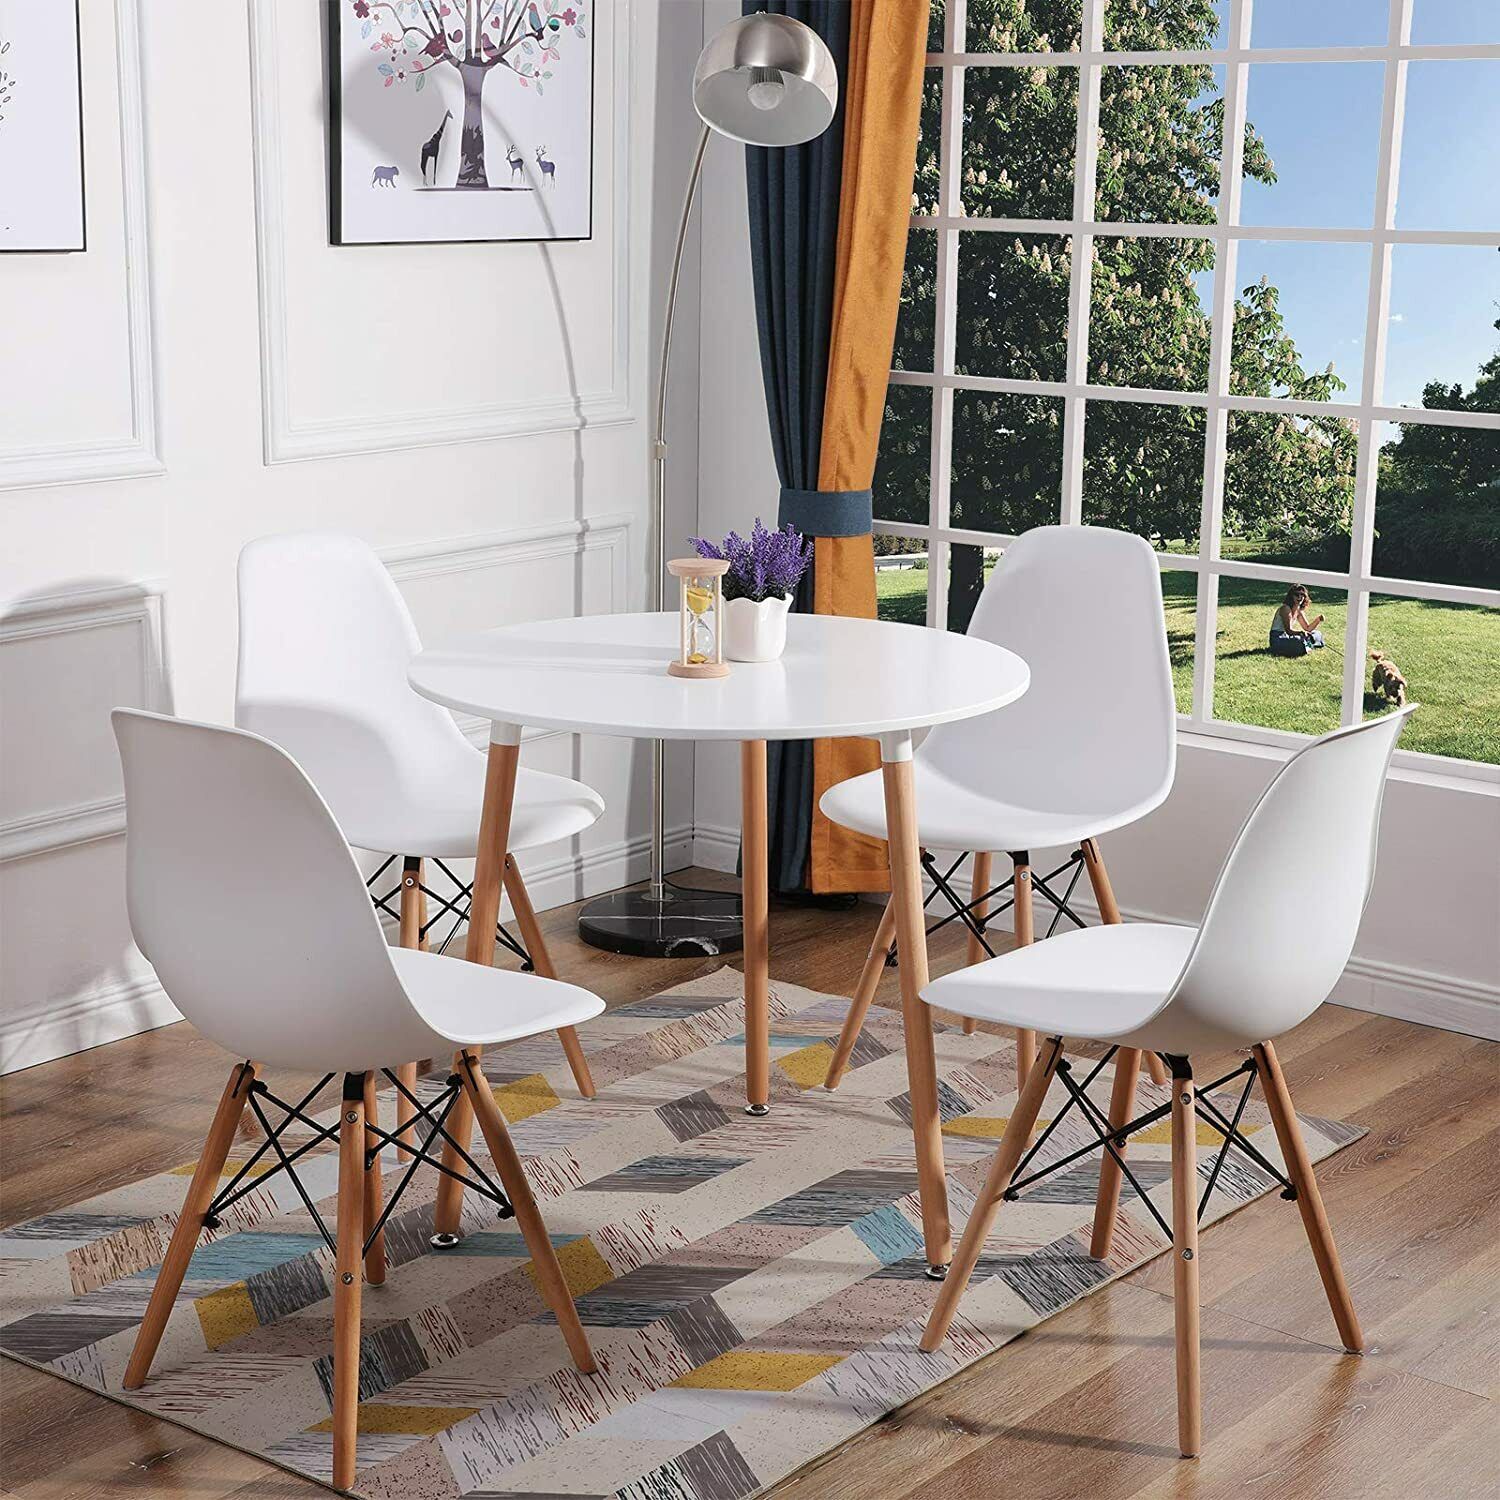 Set of 4 Dining Chair Plastic Chair for Kitchen Dining Bedroom Living Room White Fetines Does Not Apply - фотография #11